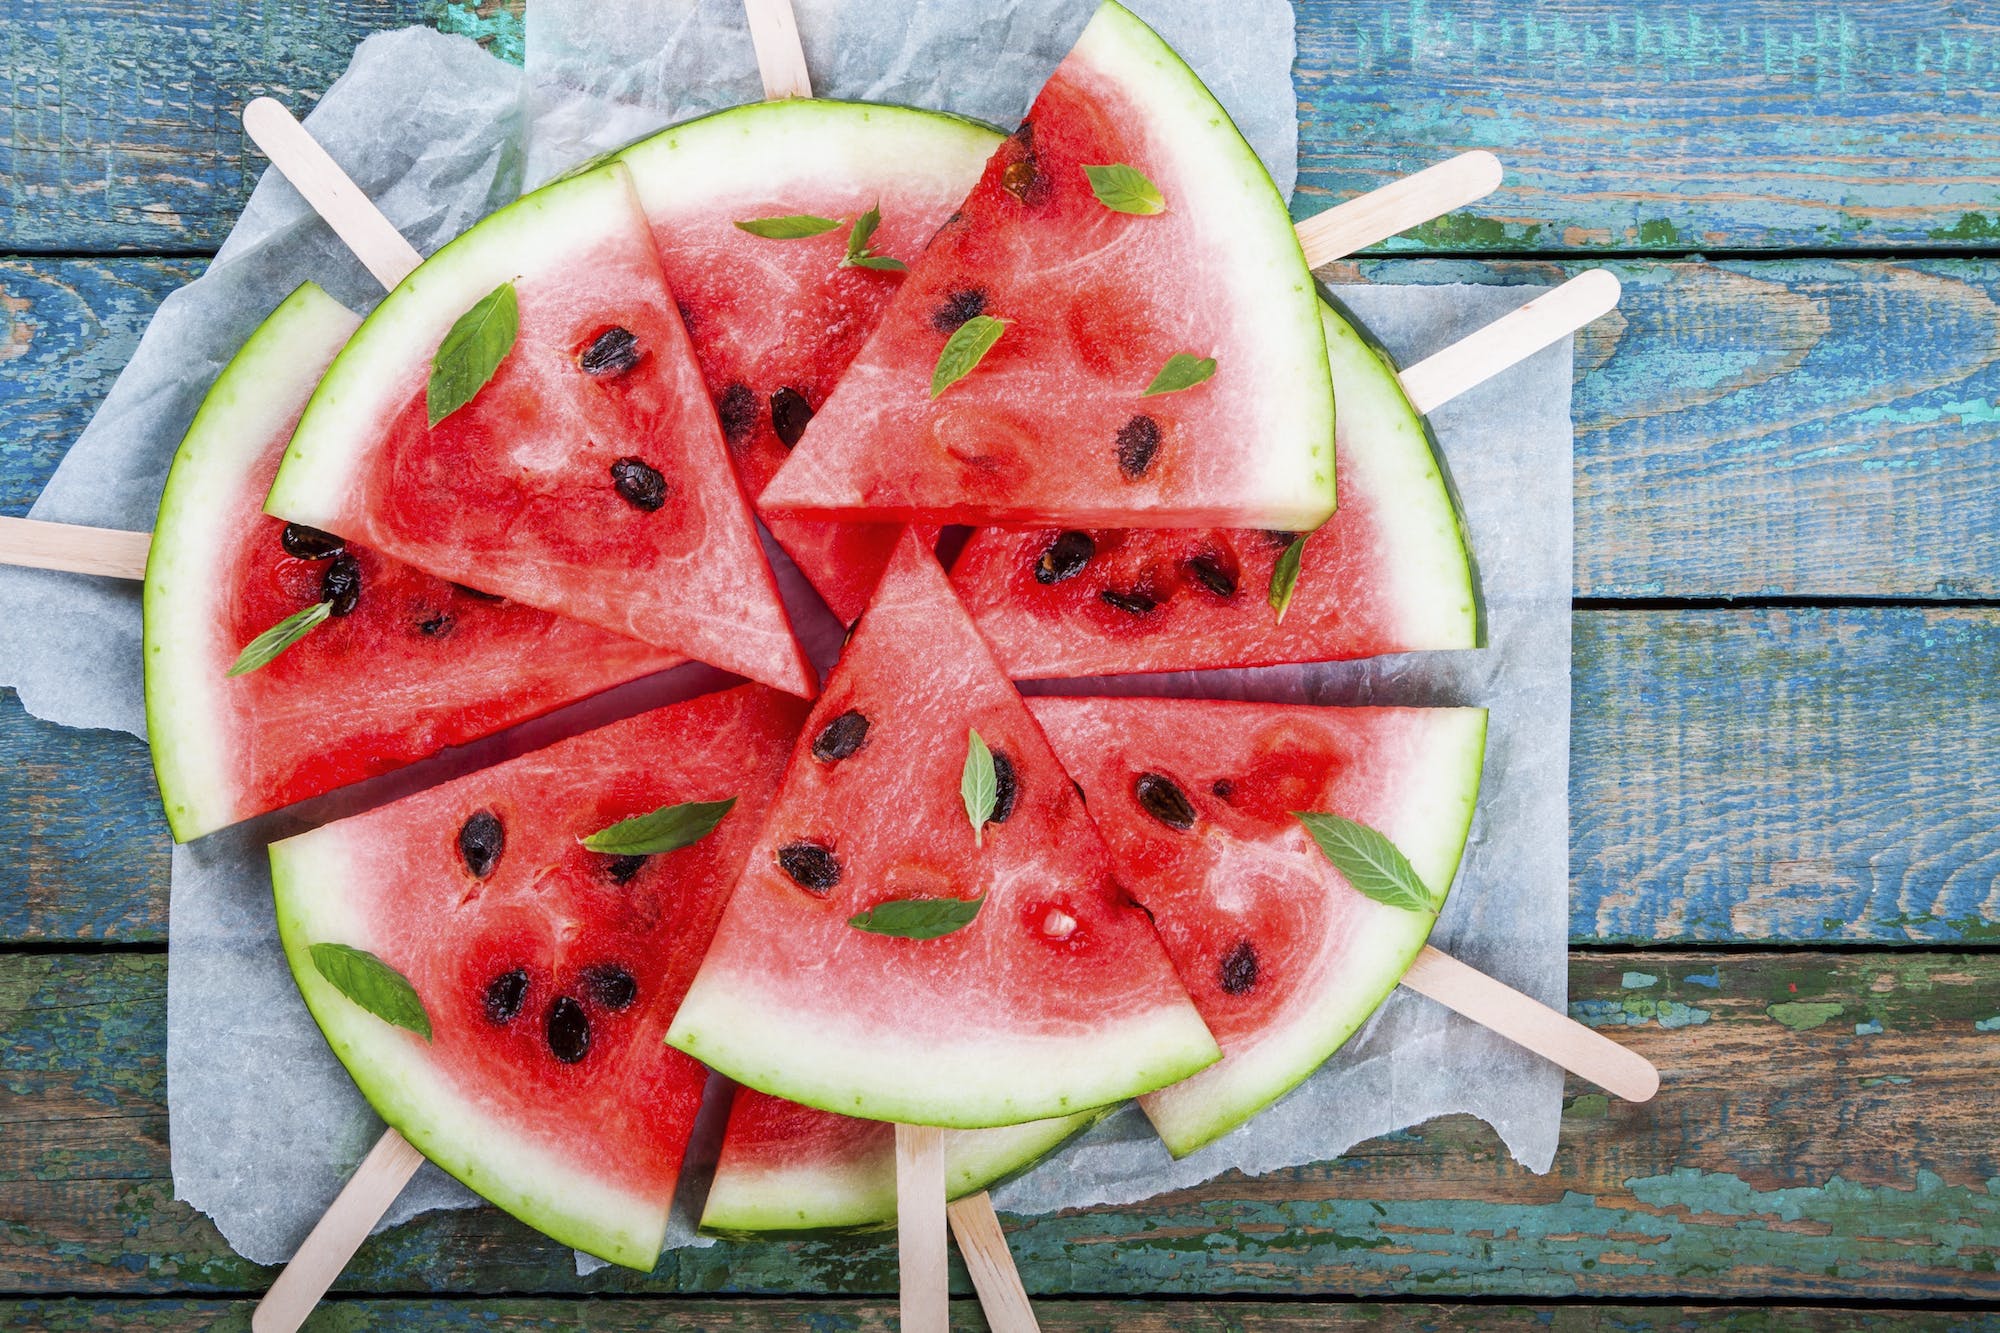 Watermelon: More than Just Water